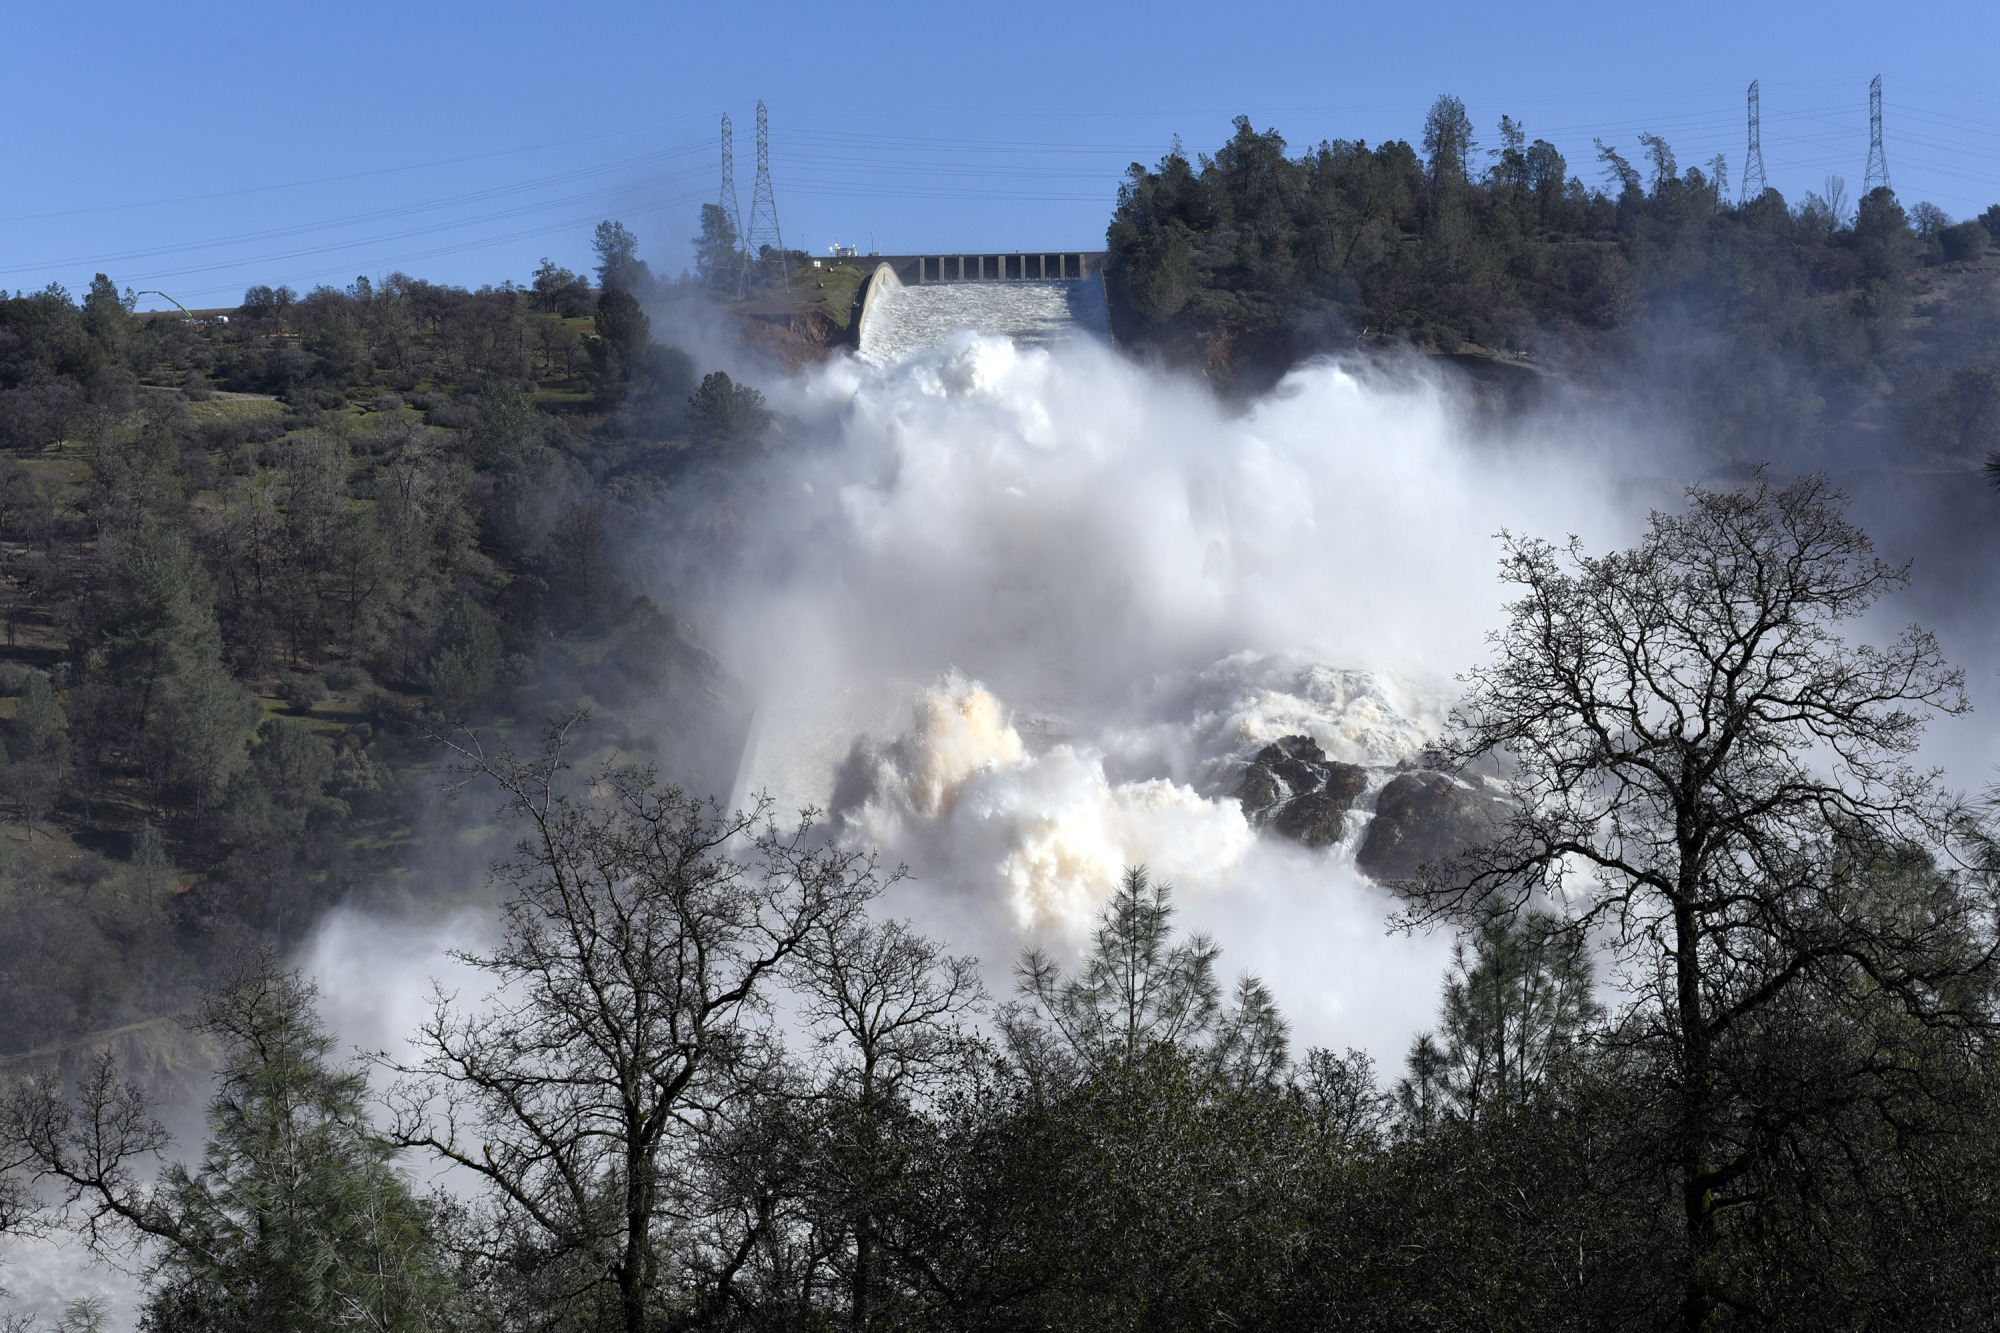 Water is released down the damaged primary spillway in Oroville on Feb. 14.
